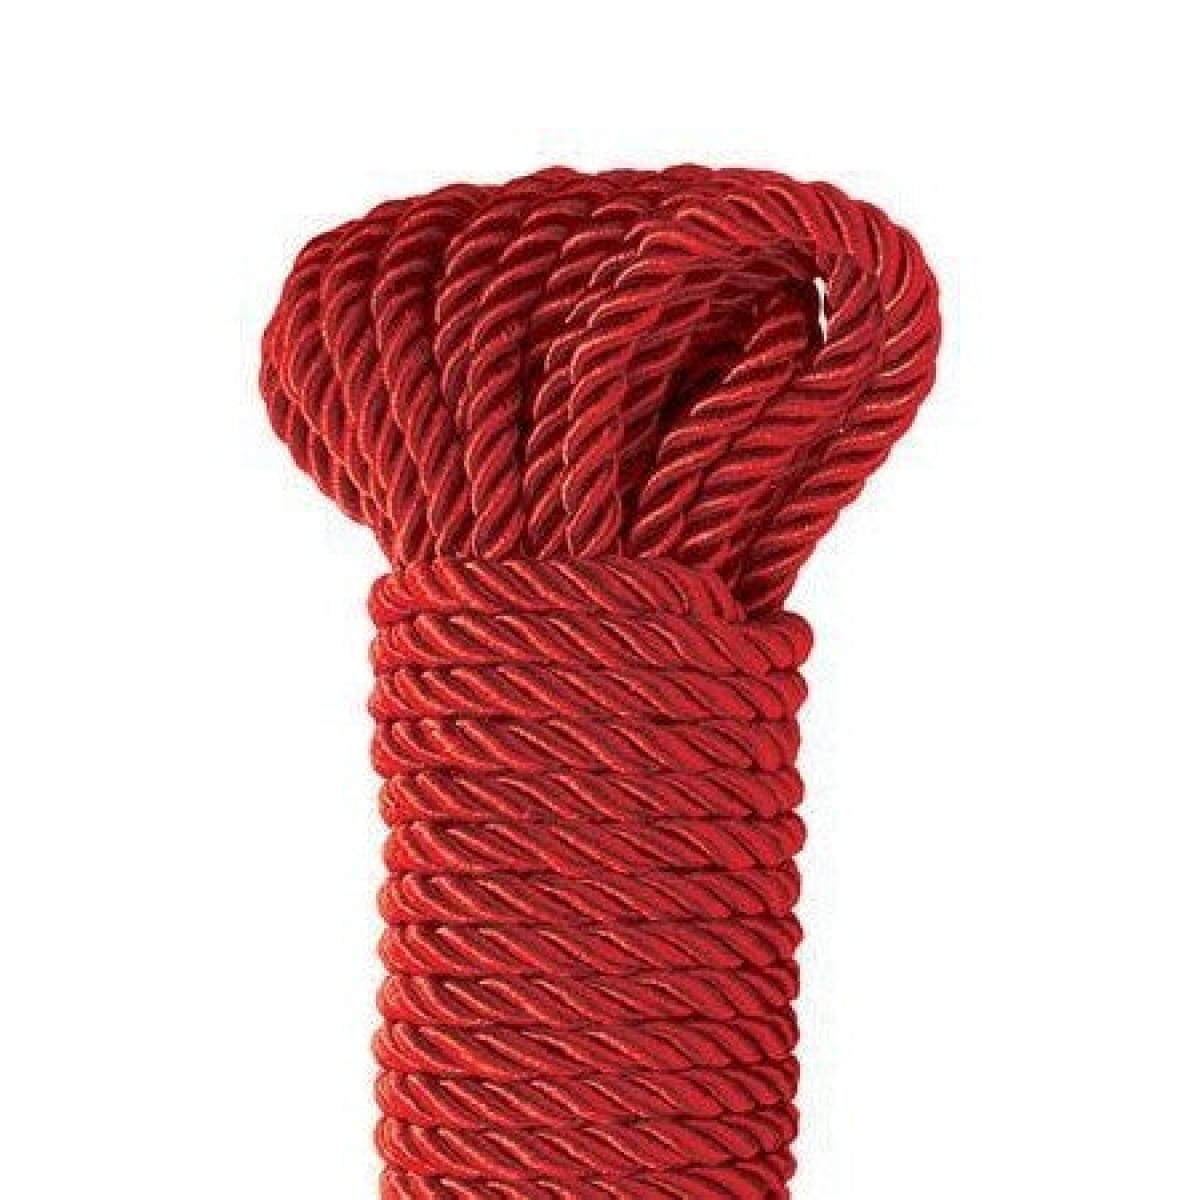 Fetish Fantasy Series Deluxe Silk Rope Red Intimates Adult Boutique